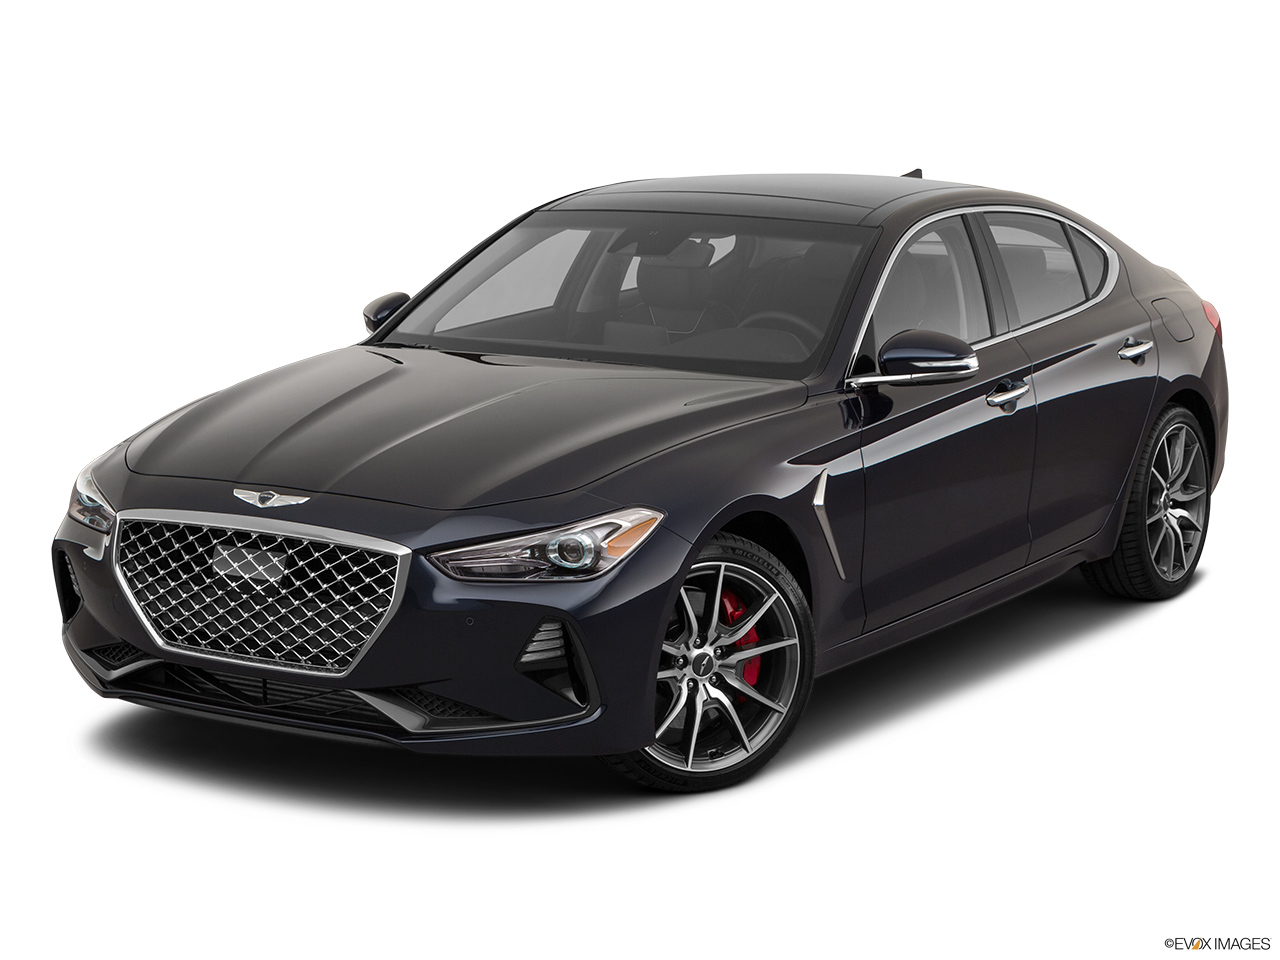 2020 Genesis G70 3.3T Elite Front angle view. 